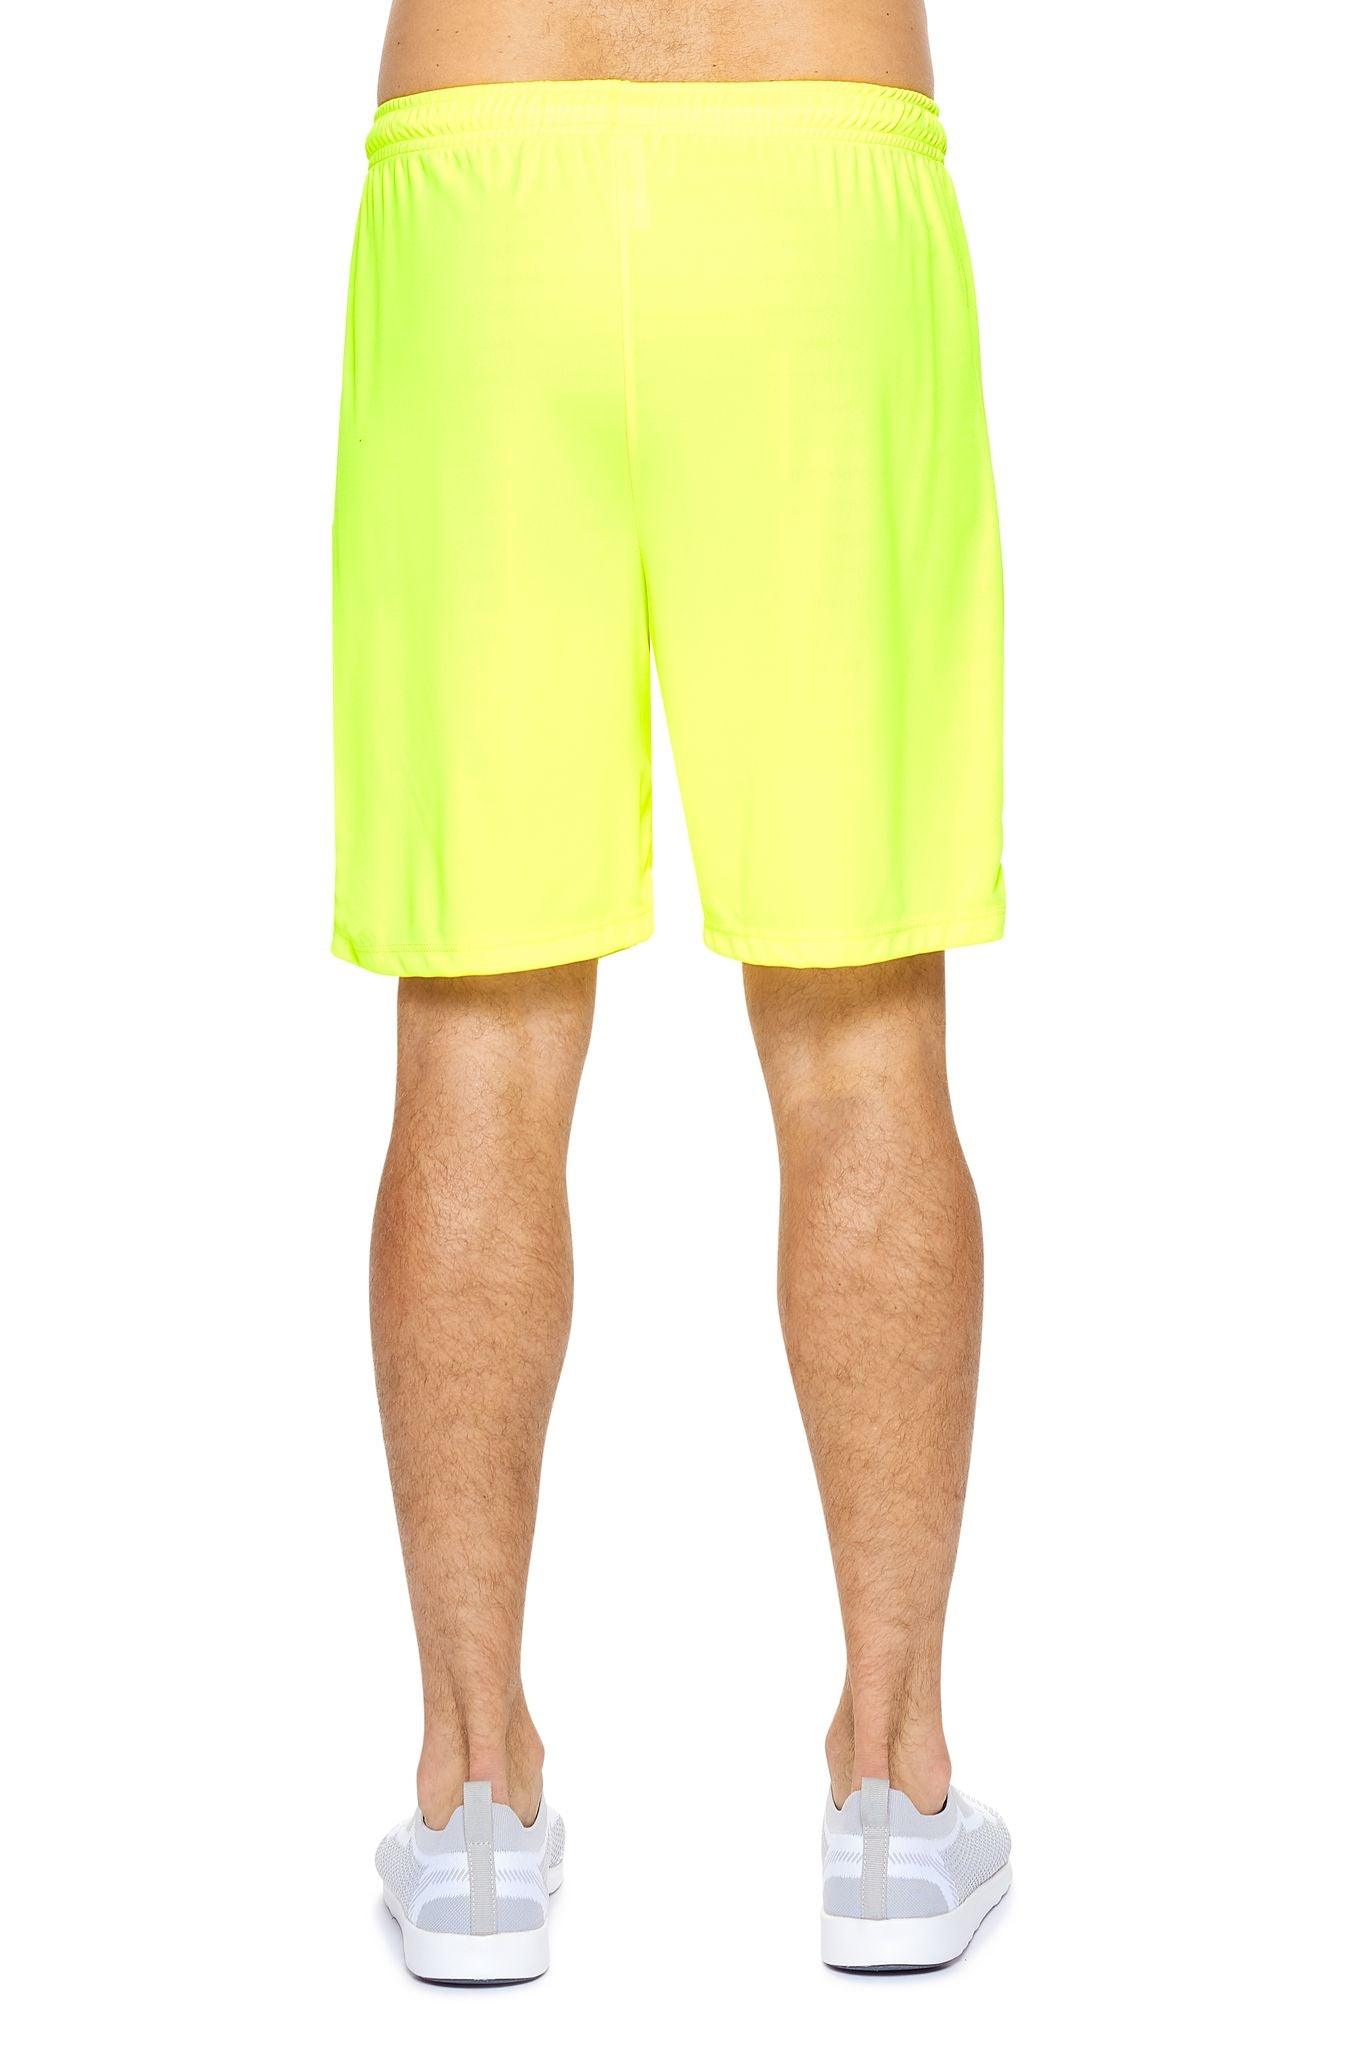 Expert Brand Men's Safety Yellow pk MaX™ Impact Shorts Image 2#safety-yellow